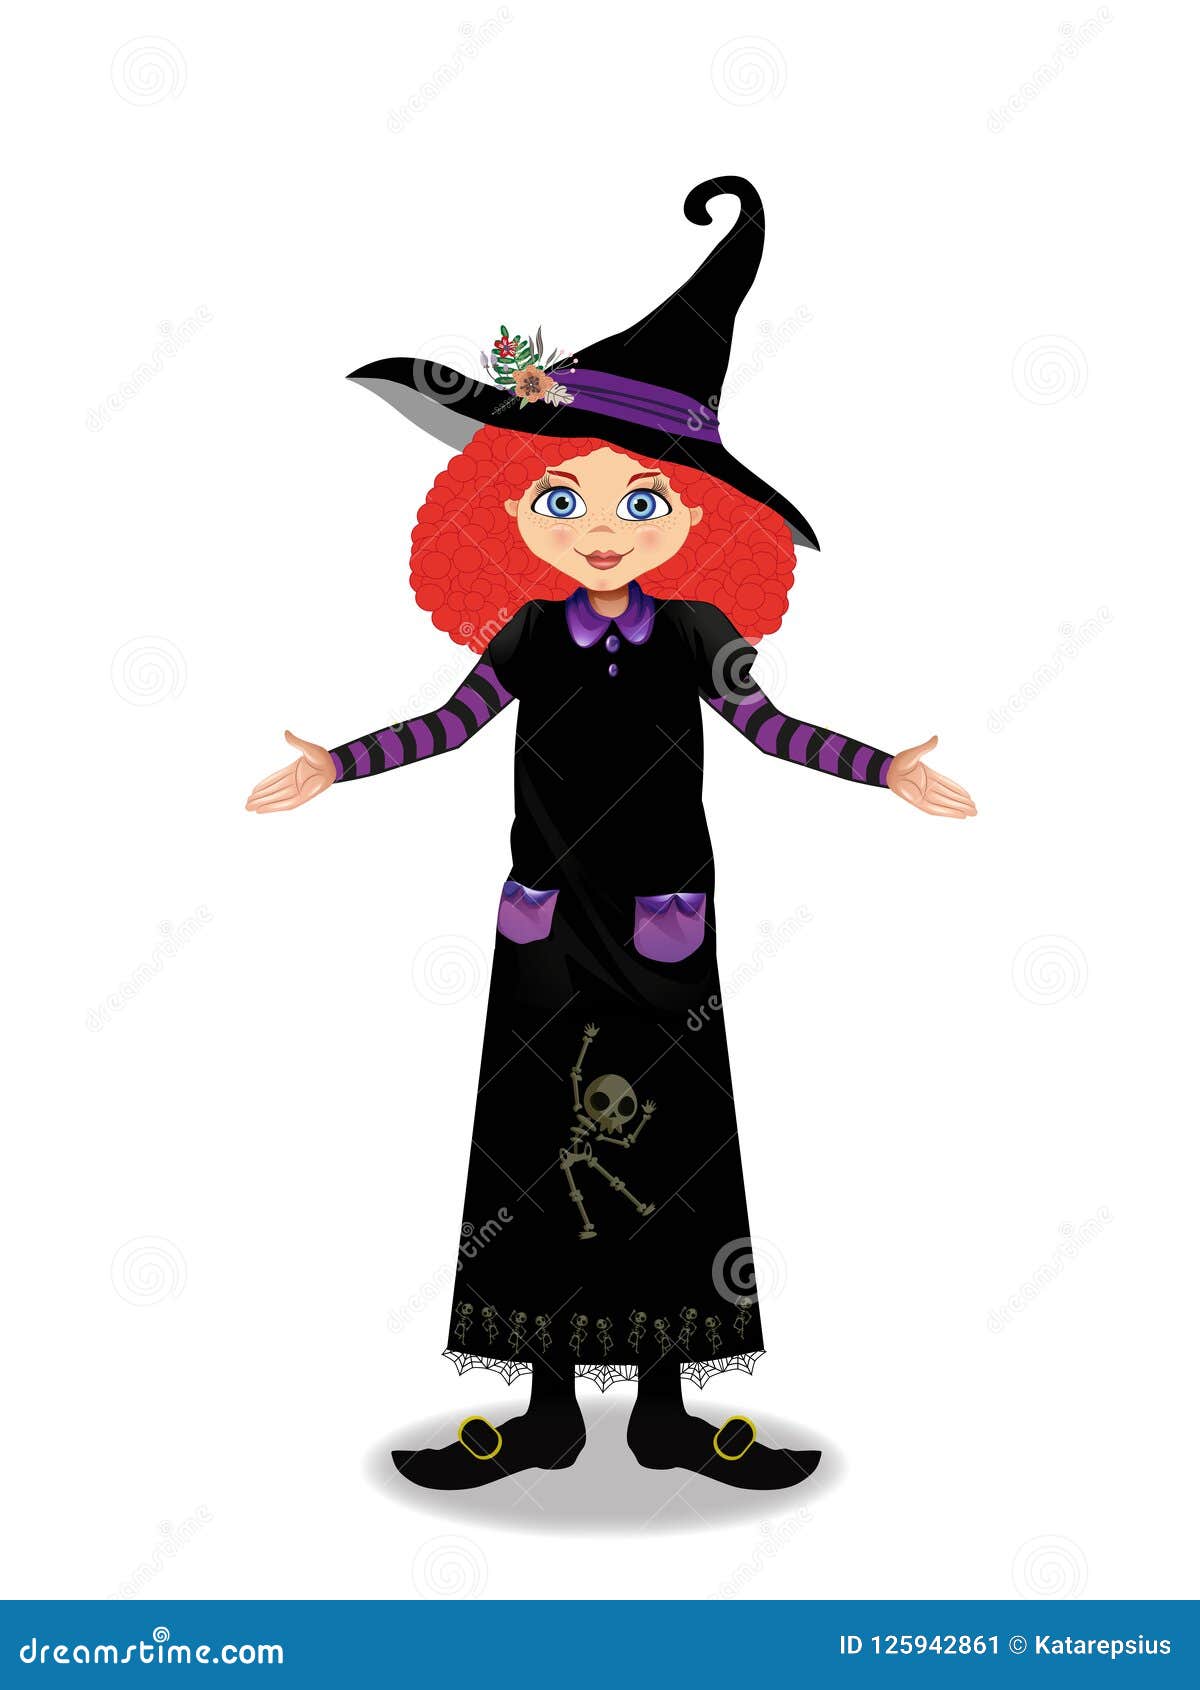 Halloween Vector Illustration of Young Witch Girl with Ginger Hair on ...